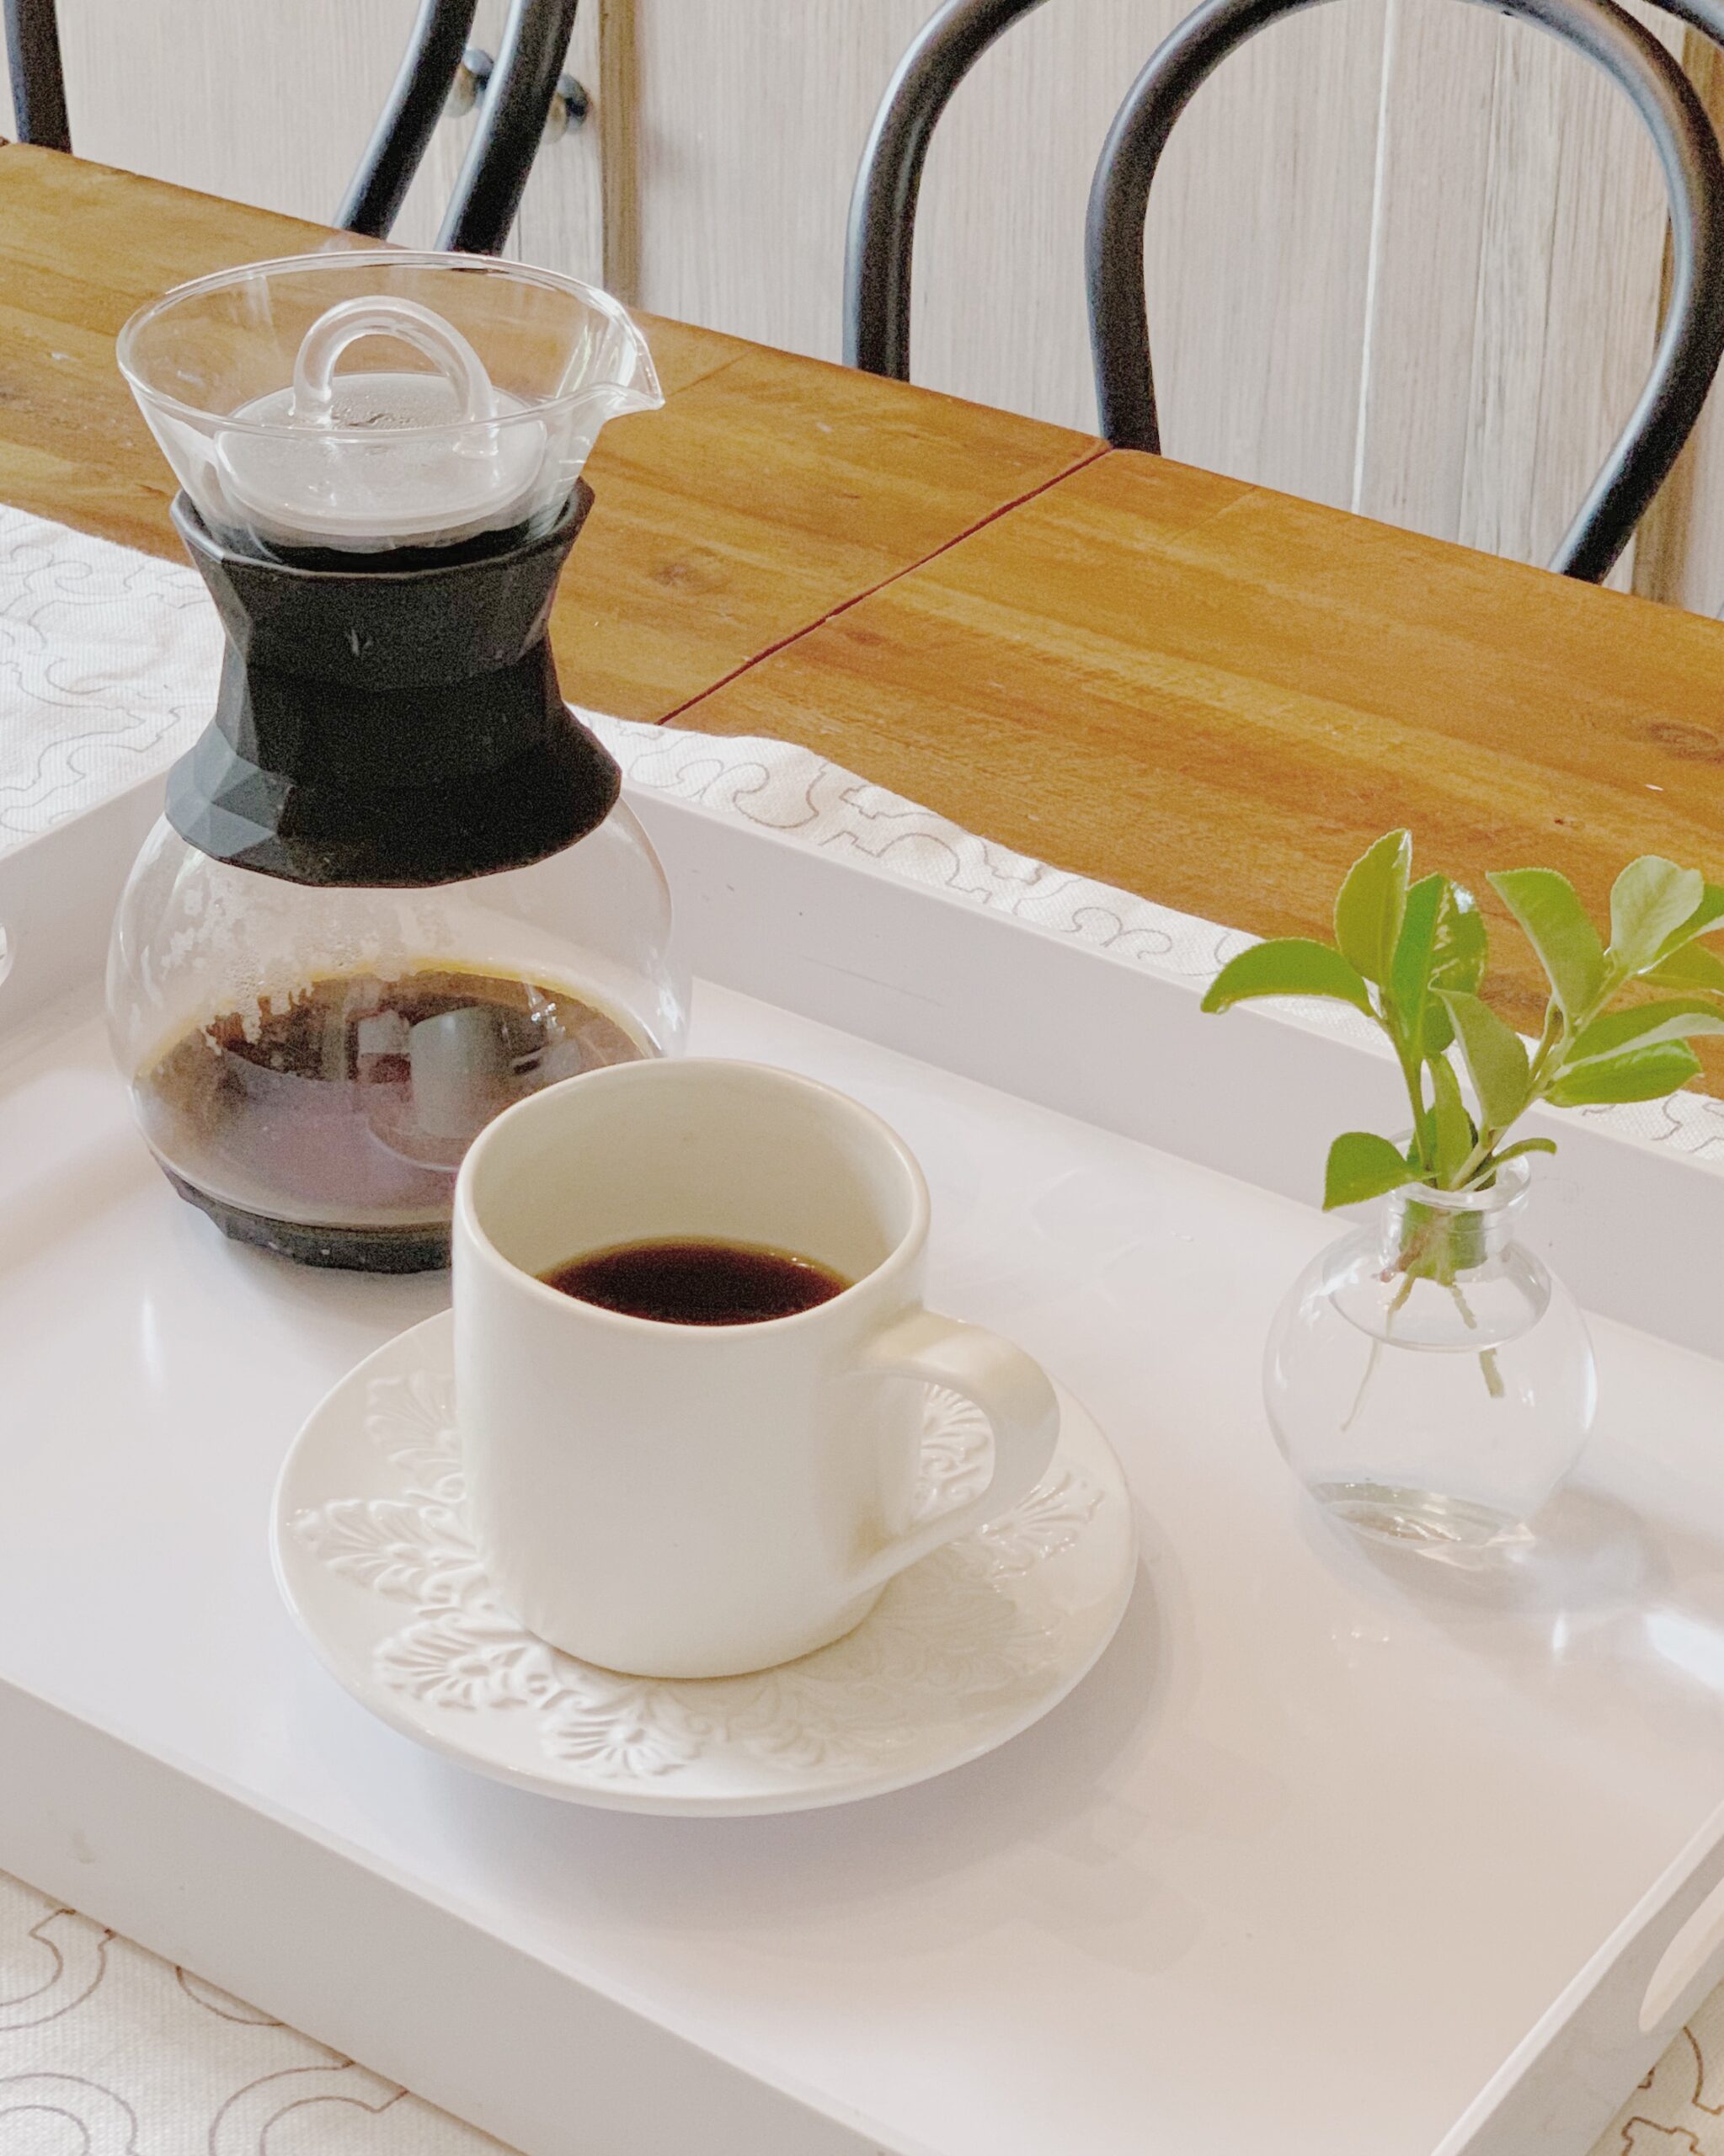 Enjoy 10% off of an Uno Casa Pour Over Coffee Maker with code LAUREL10